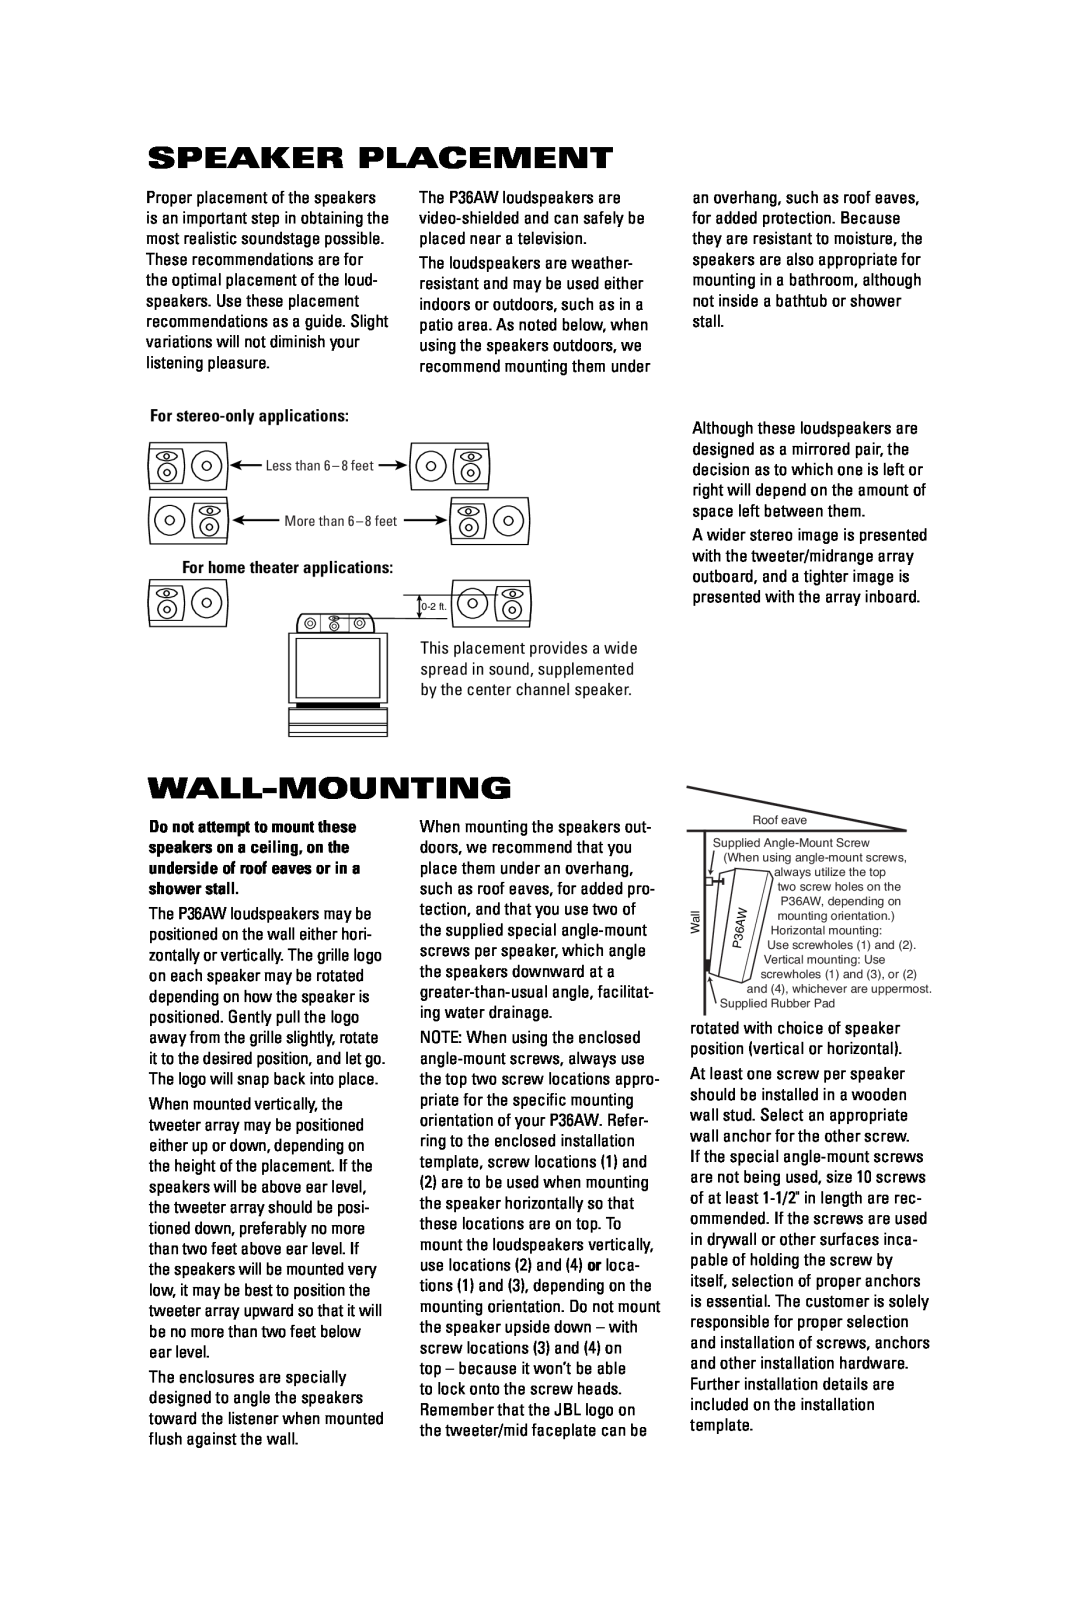 JBL P36AW manual Speaker Placement, Wall-Mounting, For stereo-onlyapplications, For home theater applications 